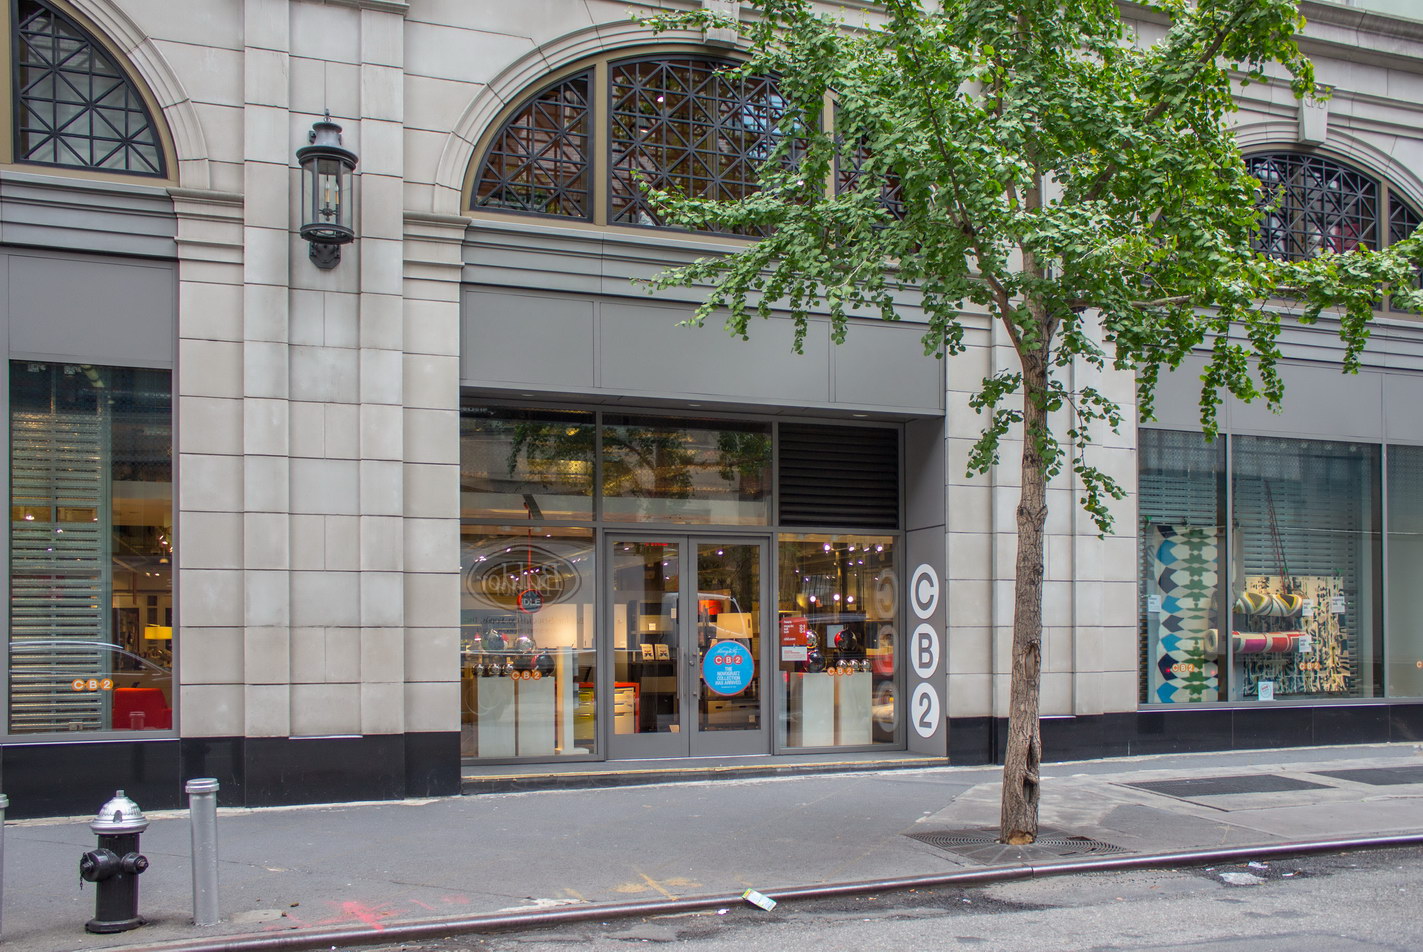 Retail space on the E58th Street side.